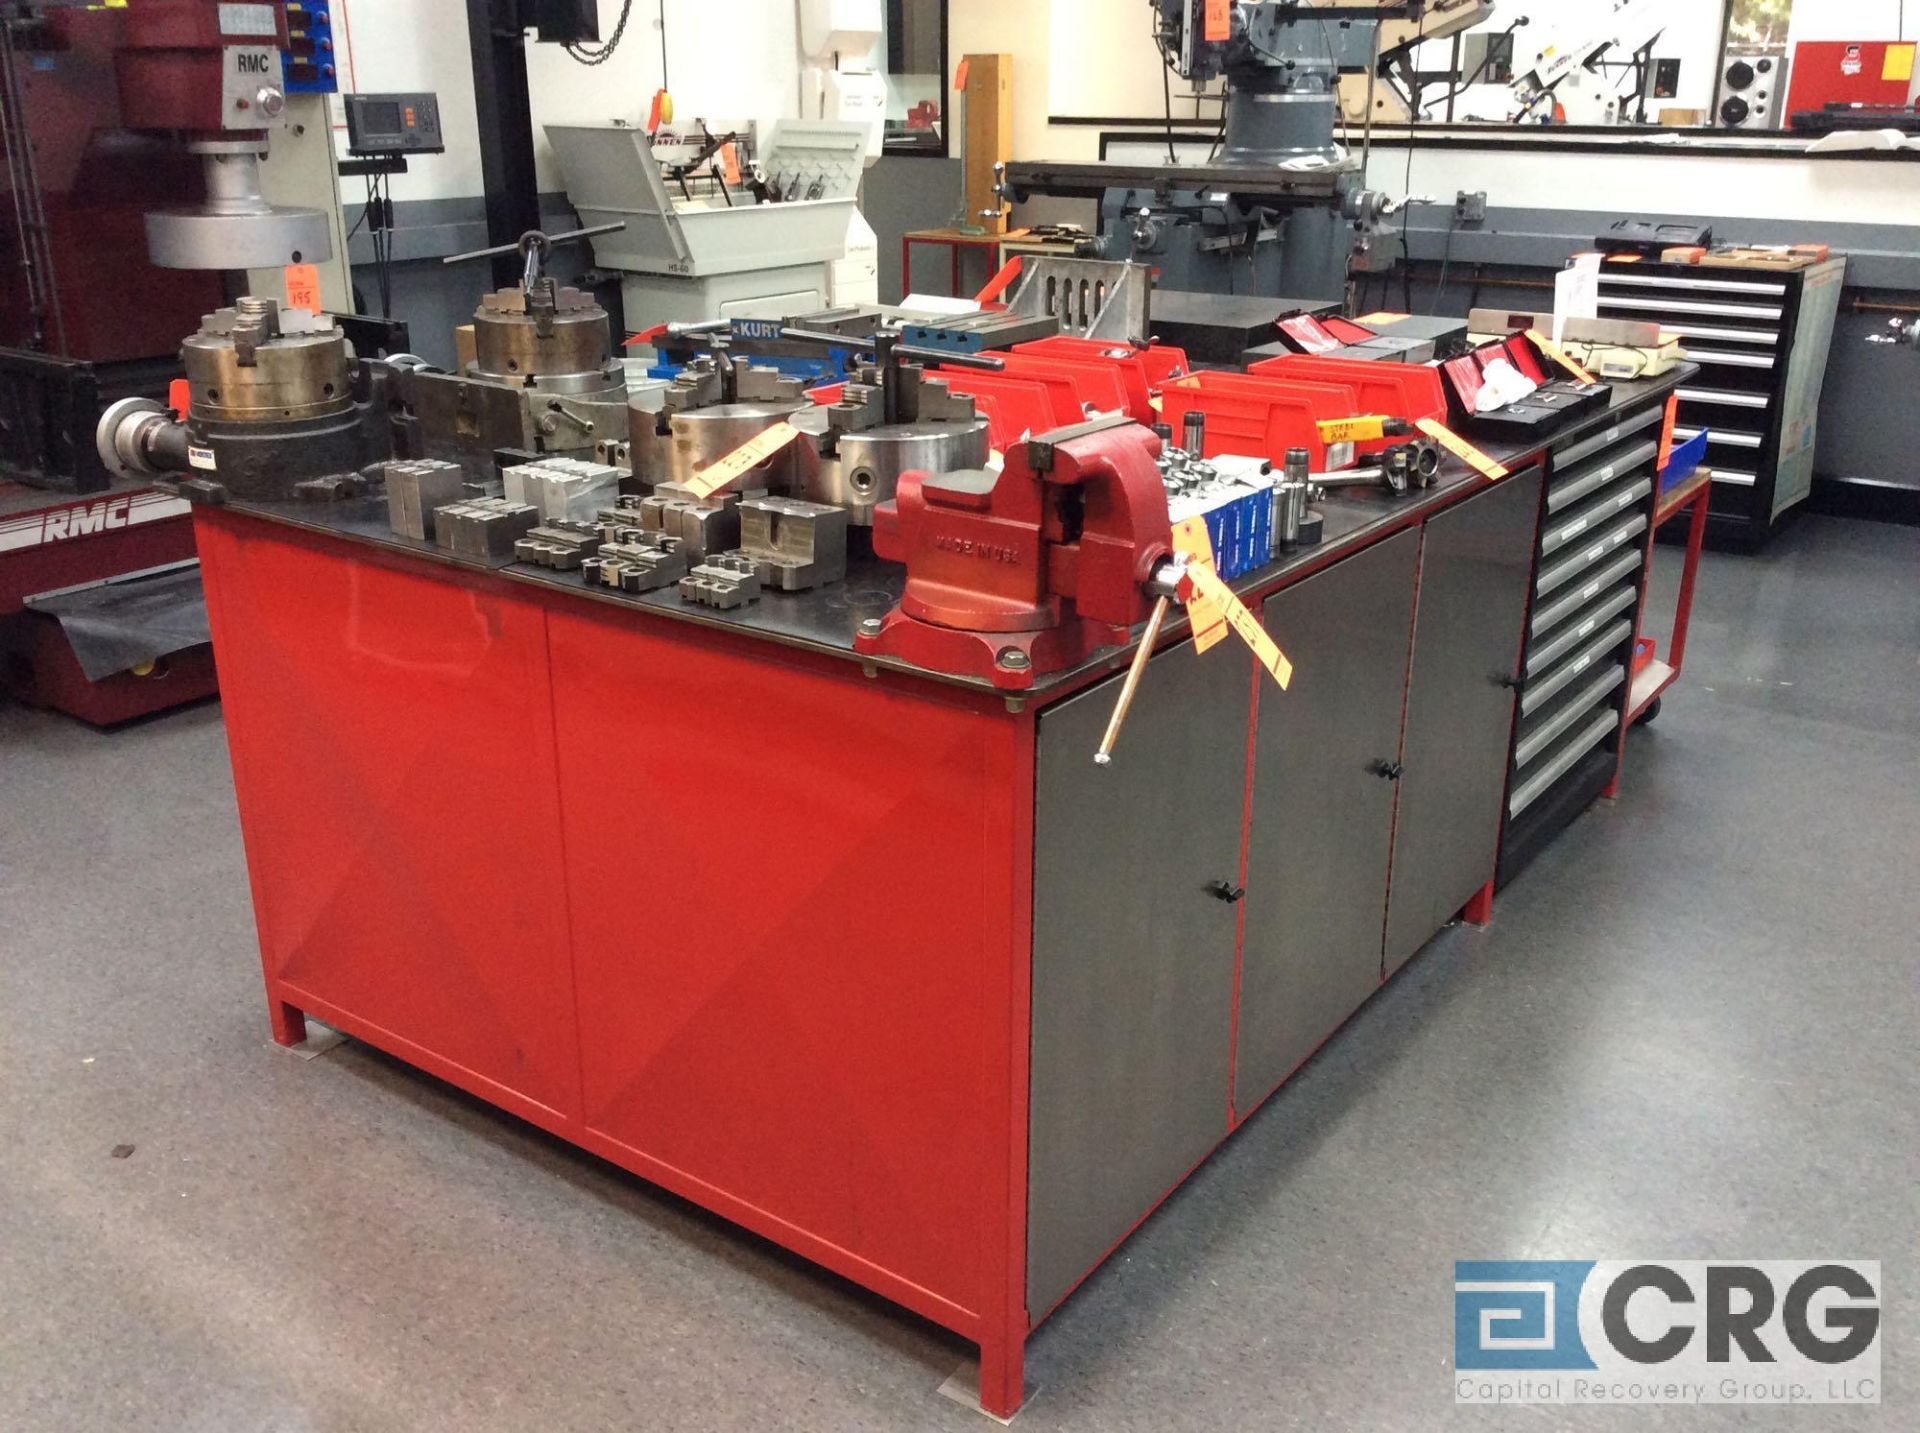 5' x 8' HD steel work bench with MAC Tools 6" bench vise and under counter storage space - Image 2 of 2